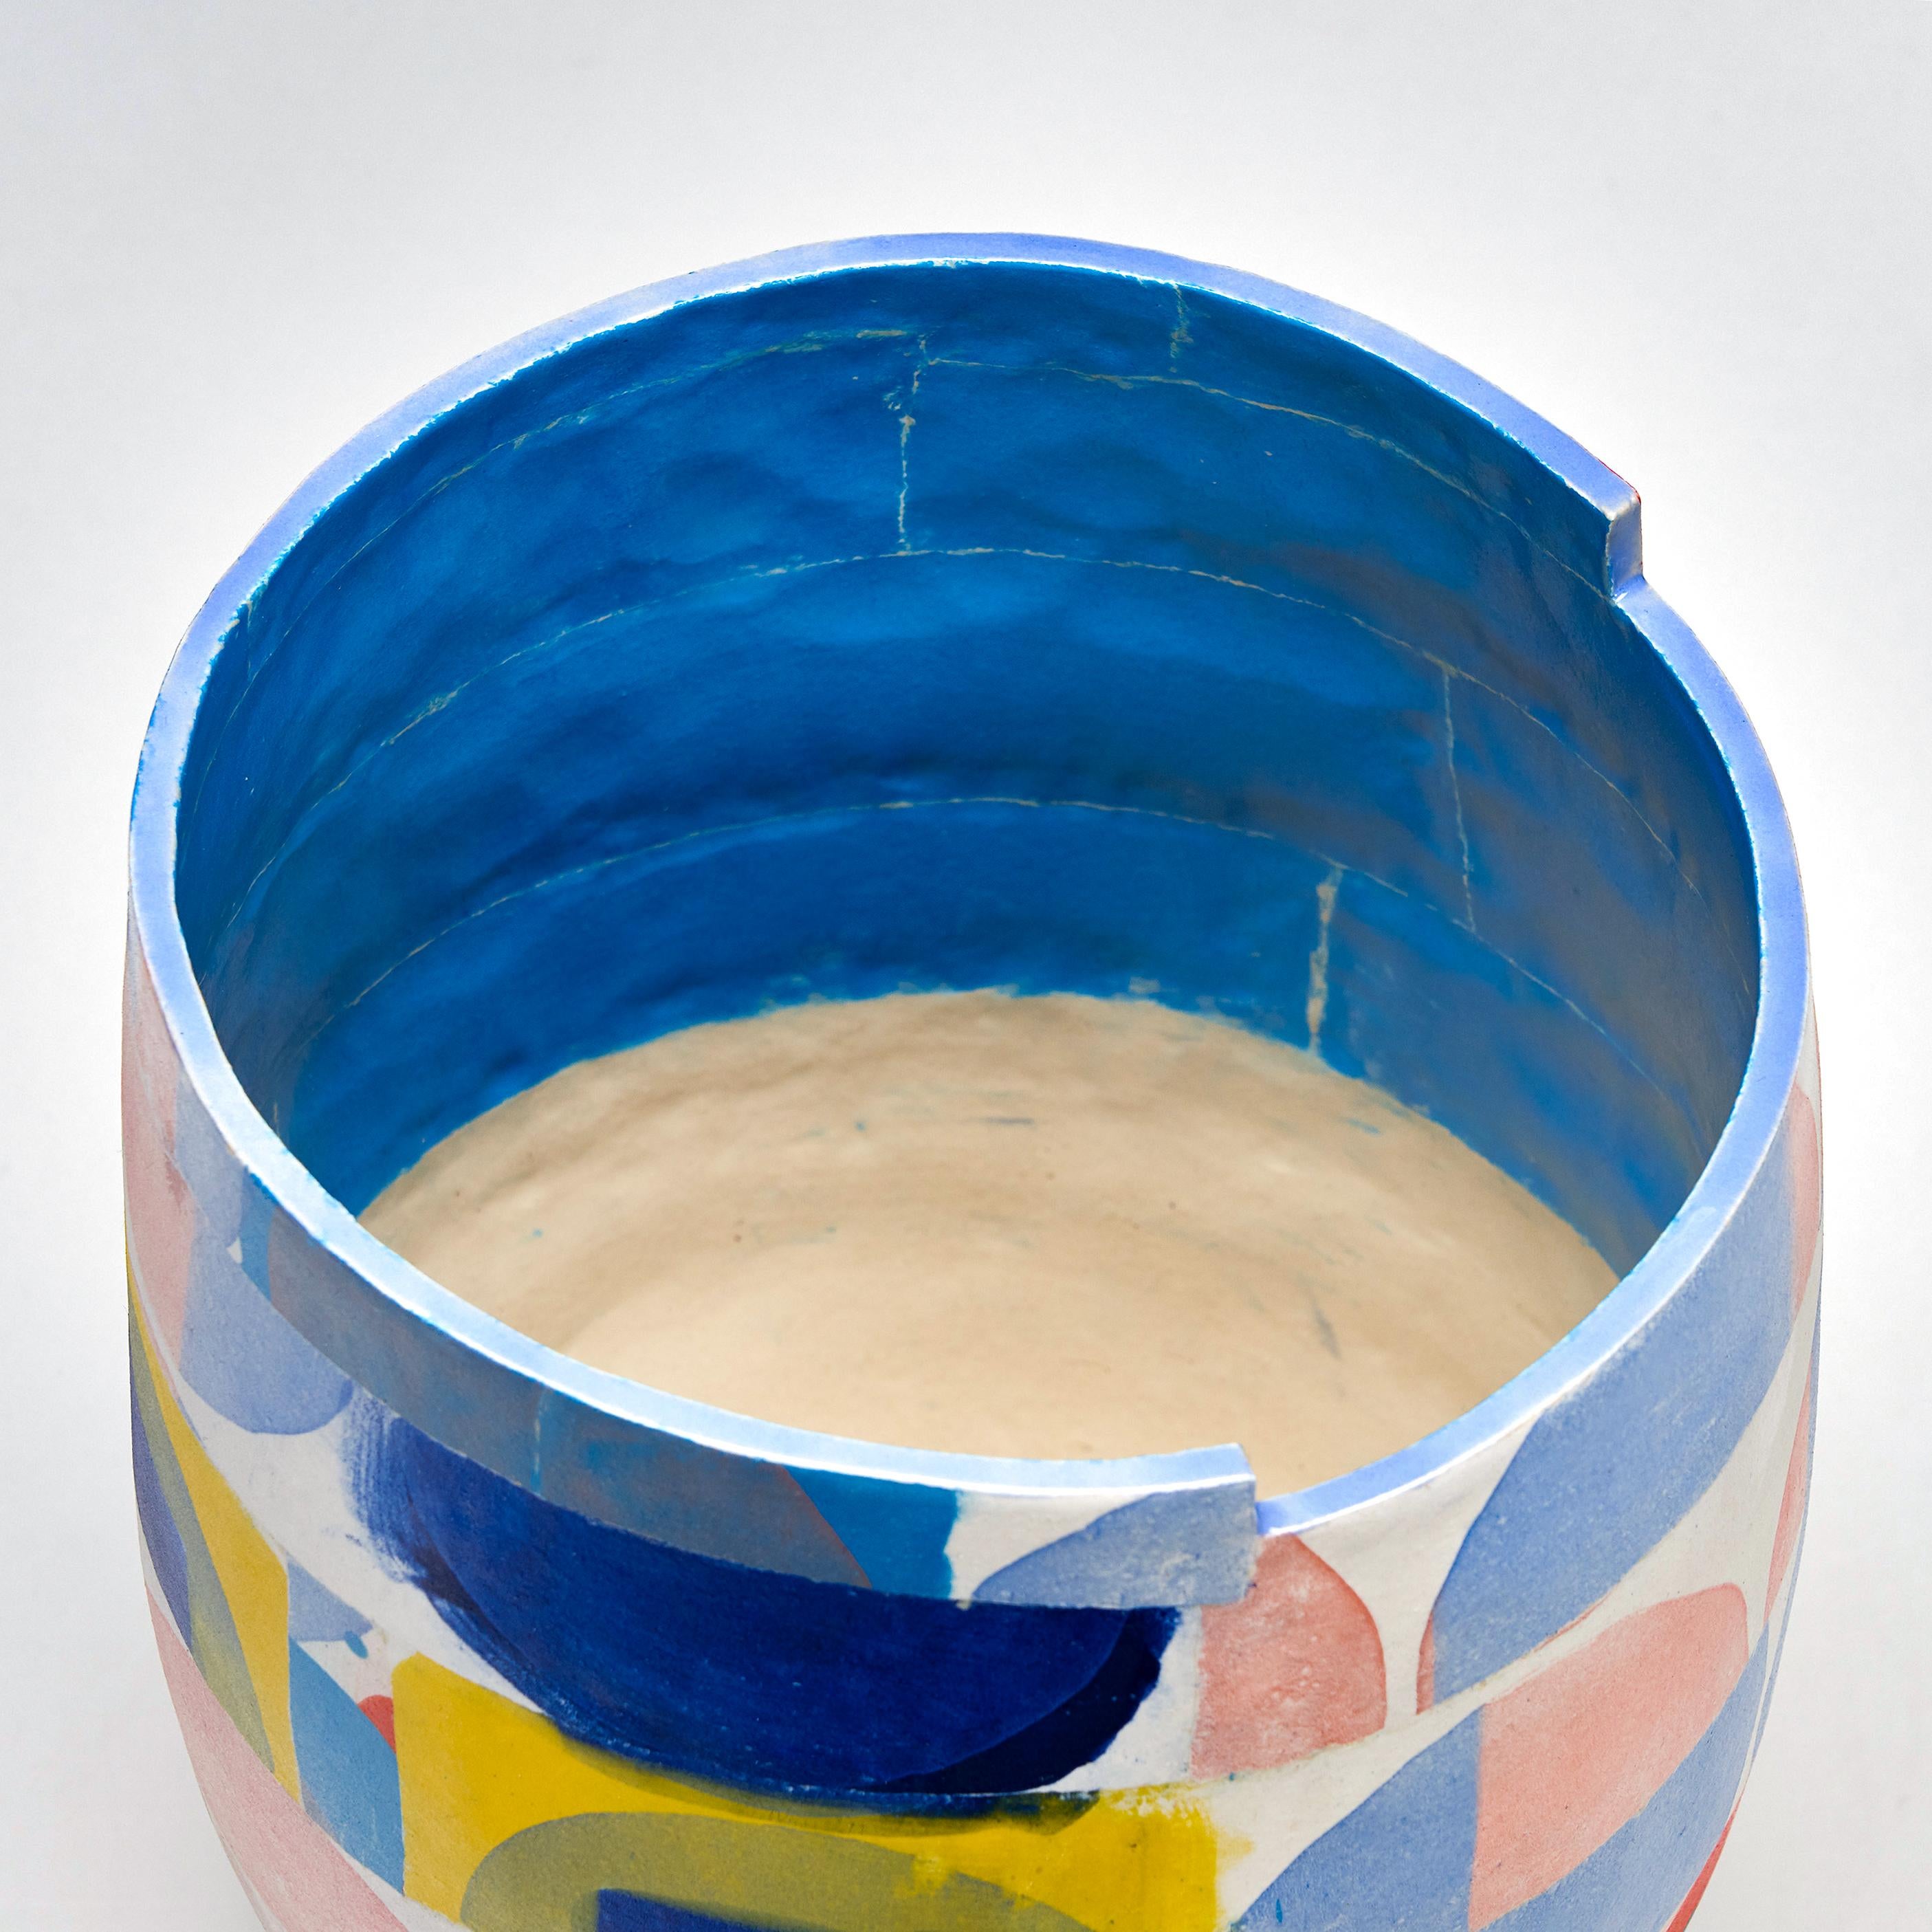 Rollmann, 2020 (Ceramic, C. 10.7 in. h x 8 in. diam. Object No.: 3819) 

The ceramic artist Corinna Petra Friedrich lives and works in Leipzig, Germany, where she studied painting, graphic design, and ceramics at the prestigious Academy of Fine